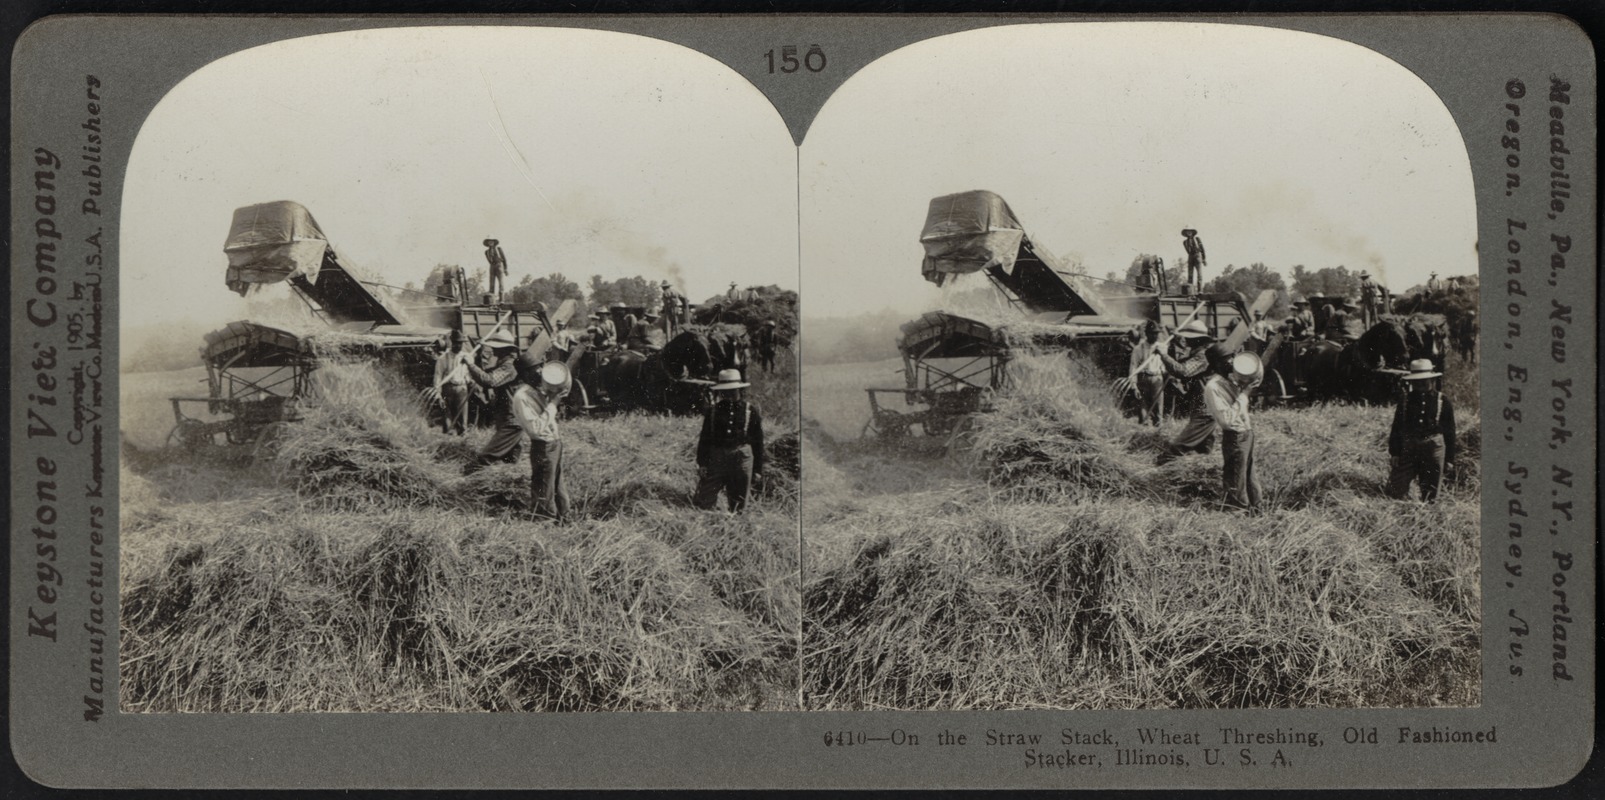 On the straw stack, old fashioned stacker, Illinois